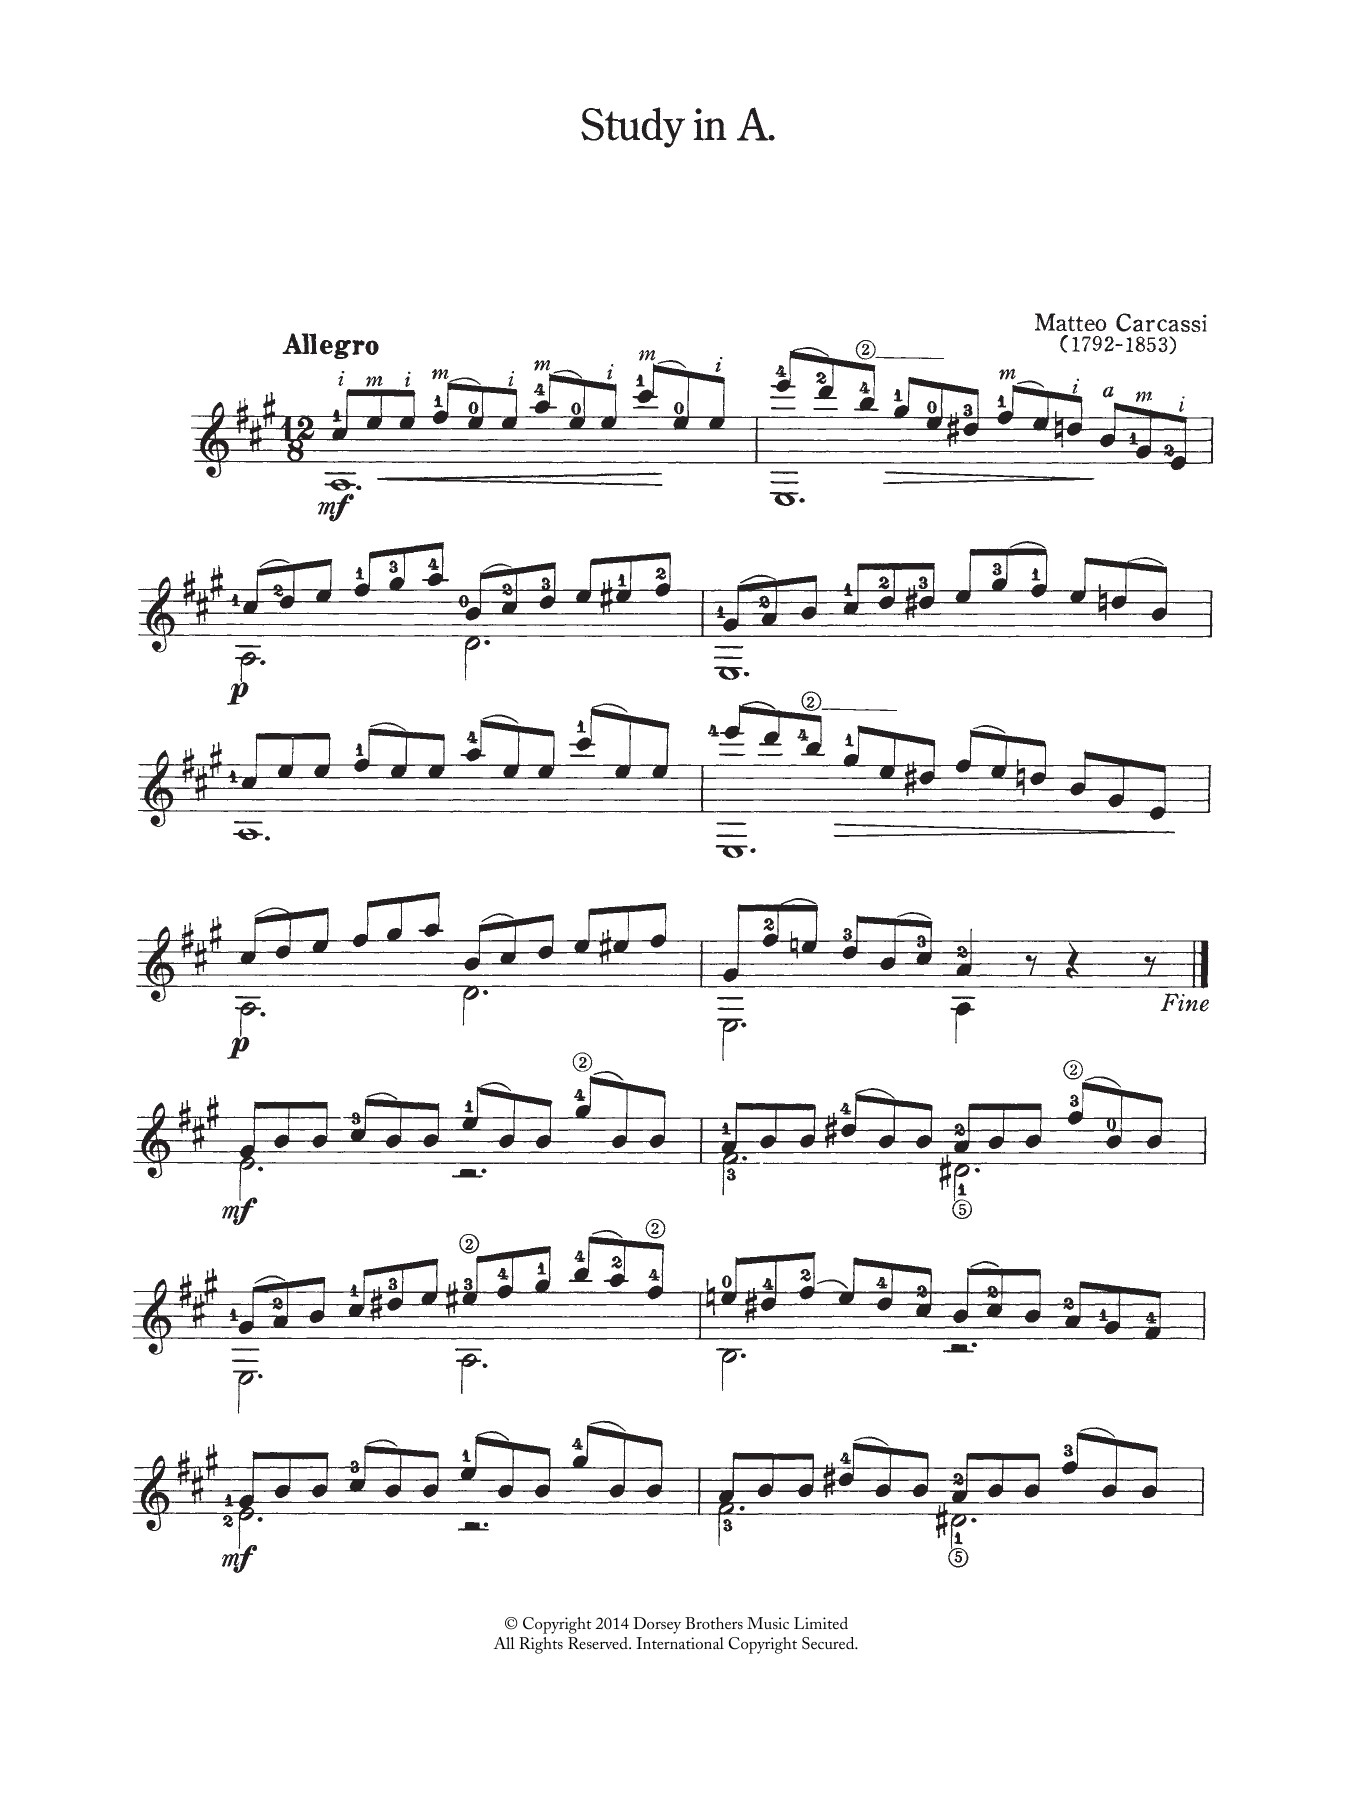 Download Matteo Carcassi Study In A Sheet Music